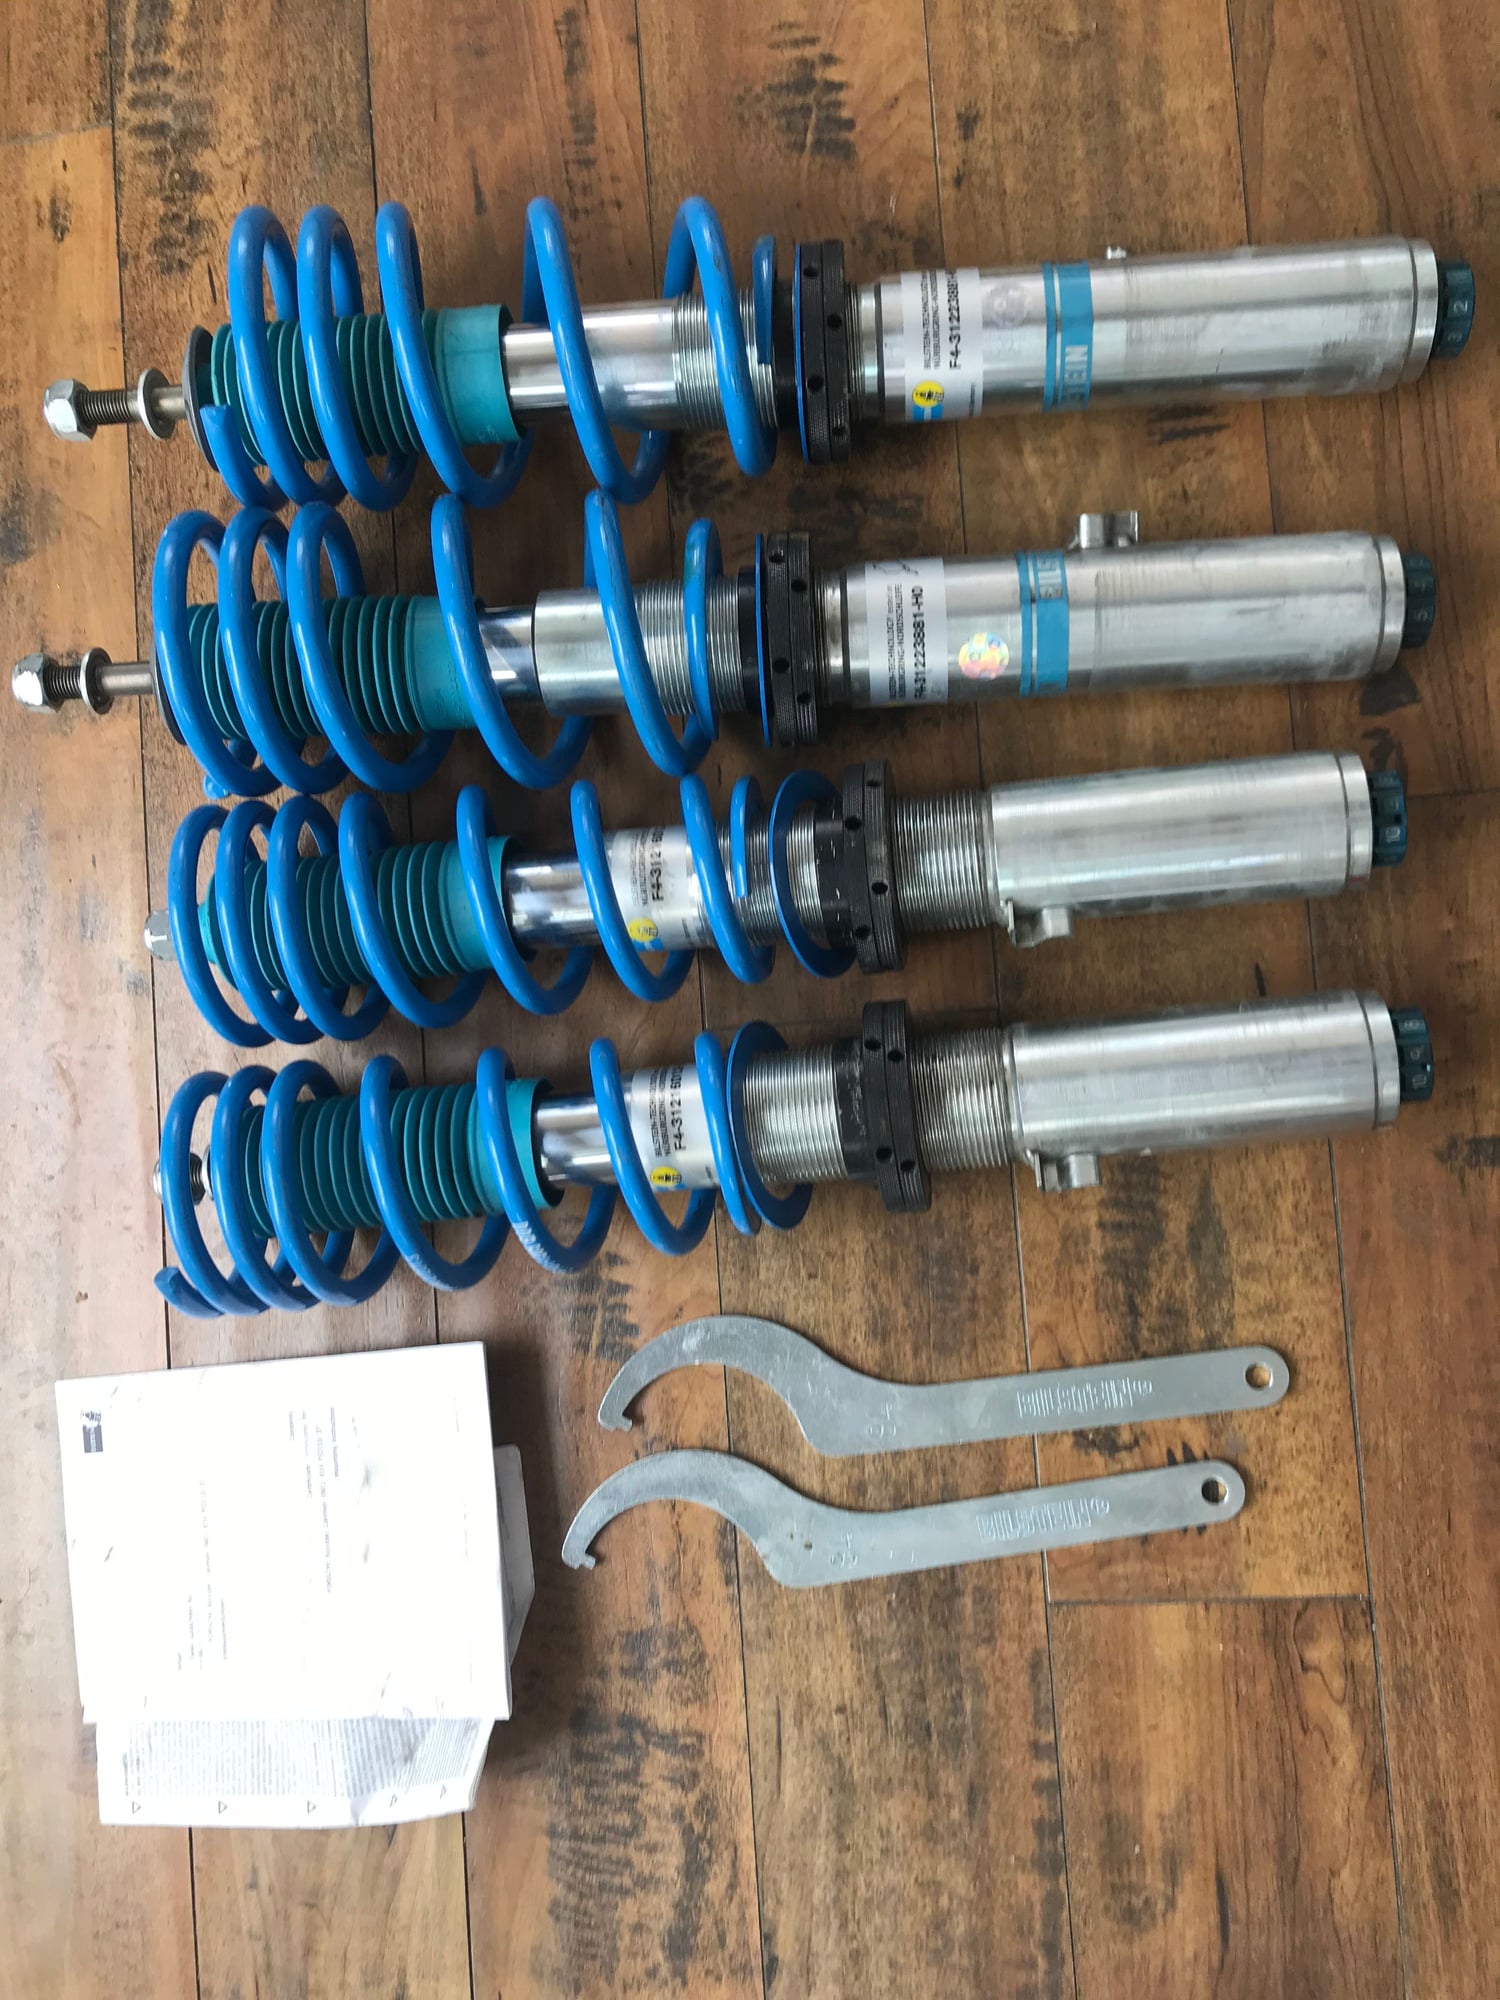 Steering/Suspension - Bilstein PSS10/PSS9 981 718 Boxster Cayman - Used - 2013 to 2017 Porsche Boxster - 2016 to 2017 Porsche 718 Boxster - 2016 to 2017 Porsche 718 Cayman - 2013 to 2017 Porsche Cayman - Whittier Hills,, CA 90601, United States